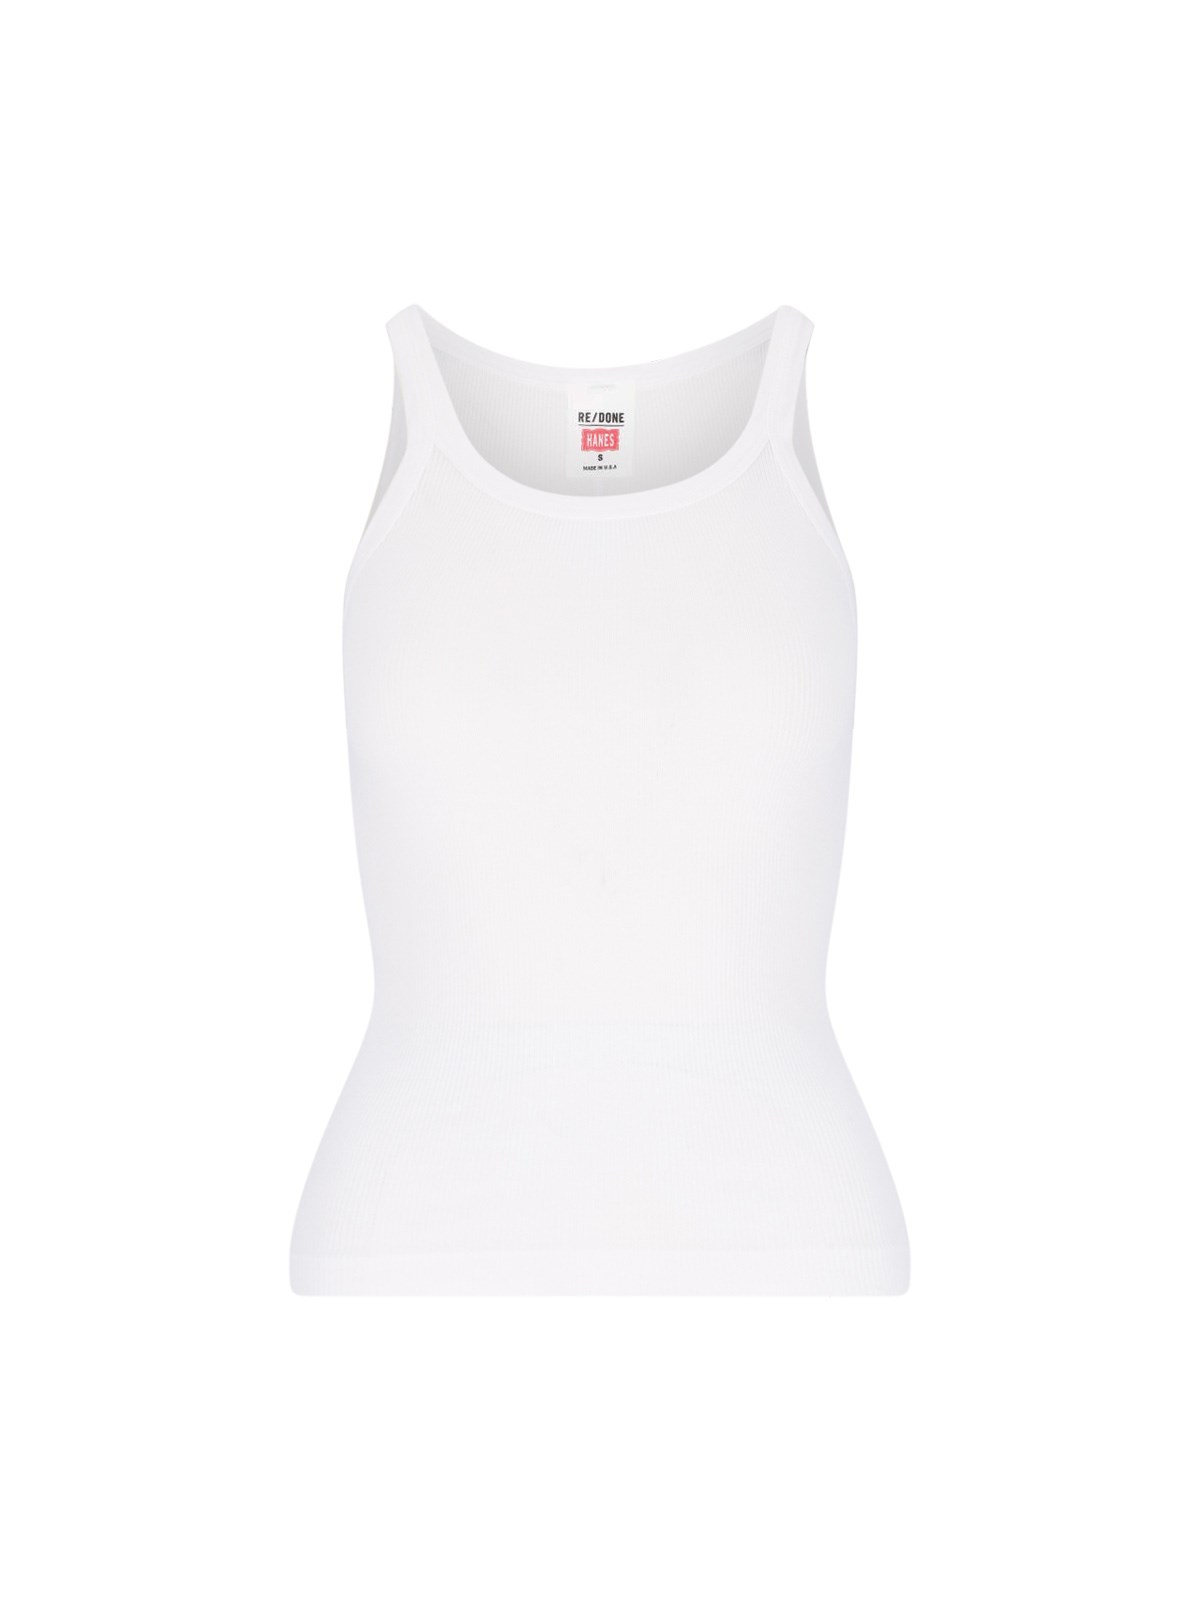 RE/DONE x Hanes Ribbed Tank in Optic White